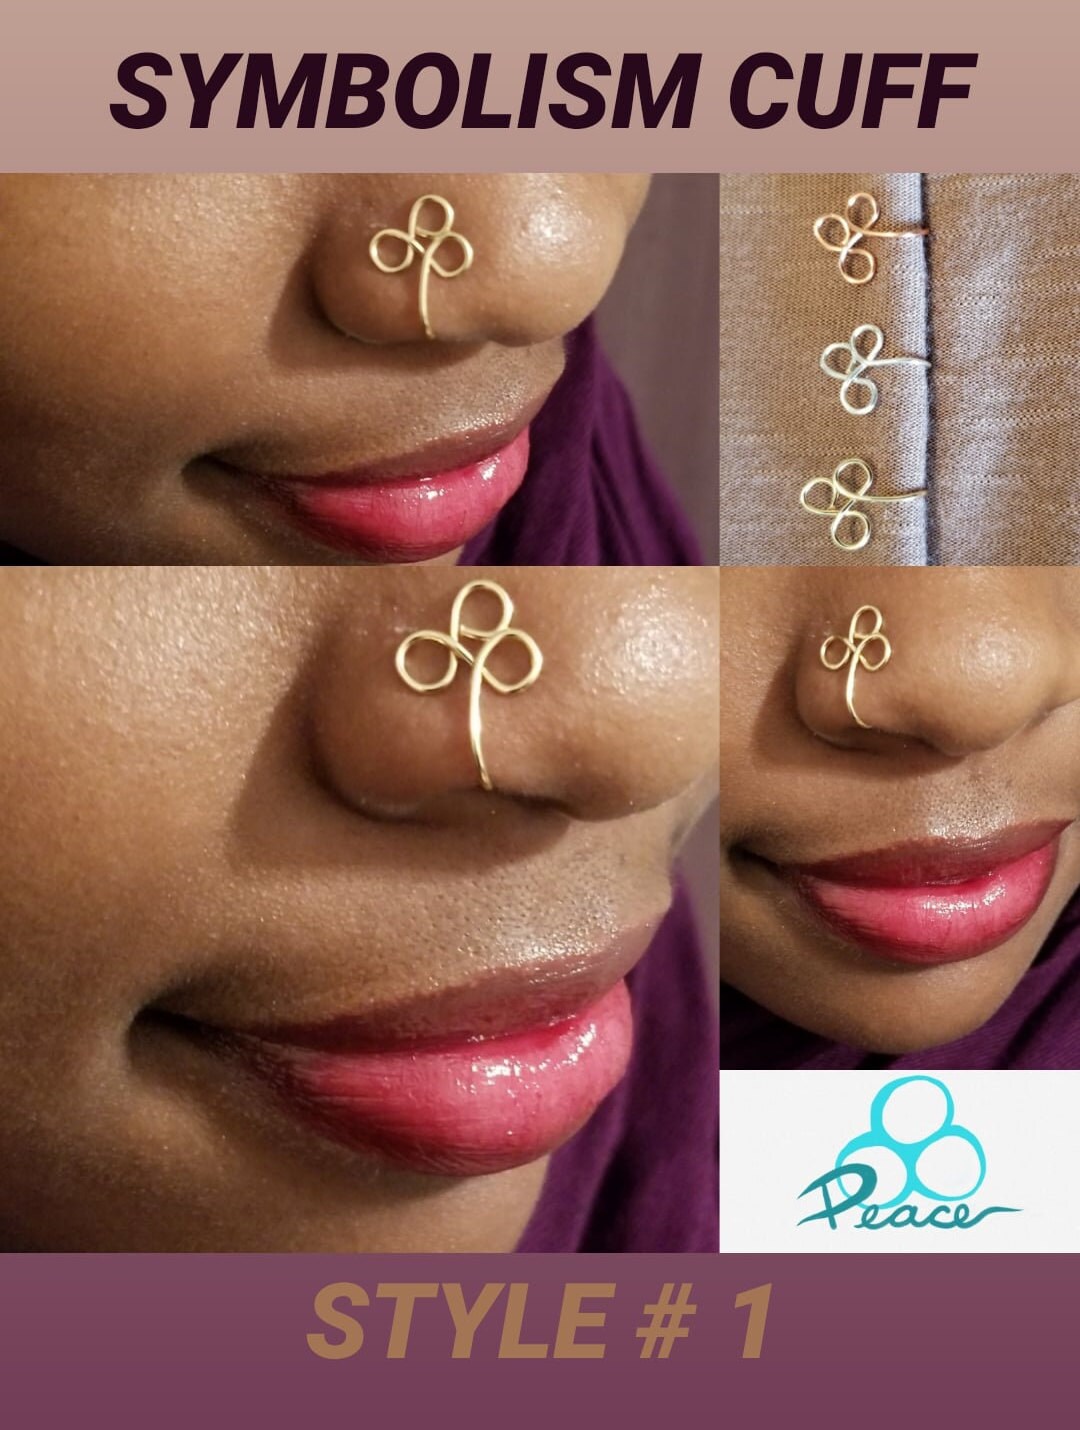 15pcs Minimalist Nose Cuff Stainless Steel Fake Nose Rings For